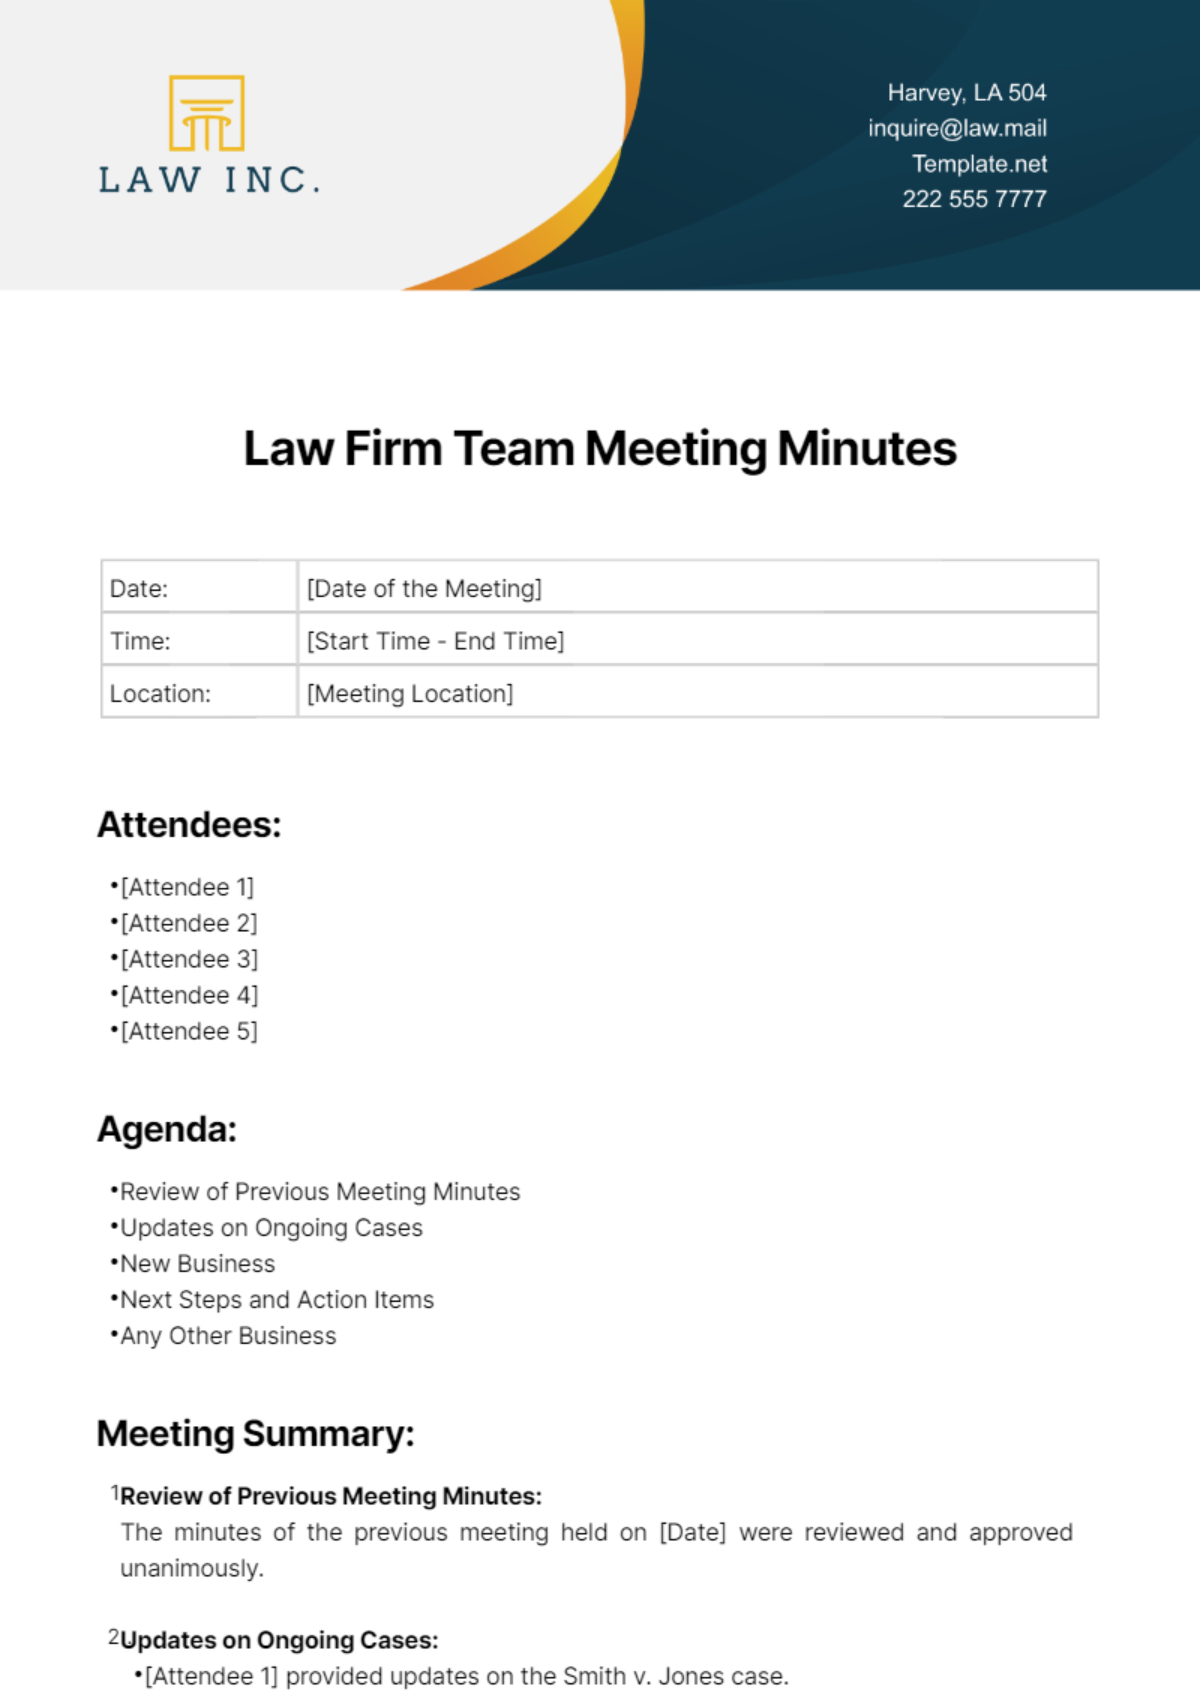 Law Firm Team Meeting Minutes Template